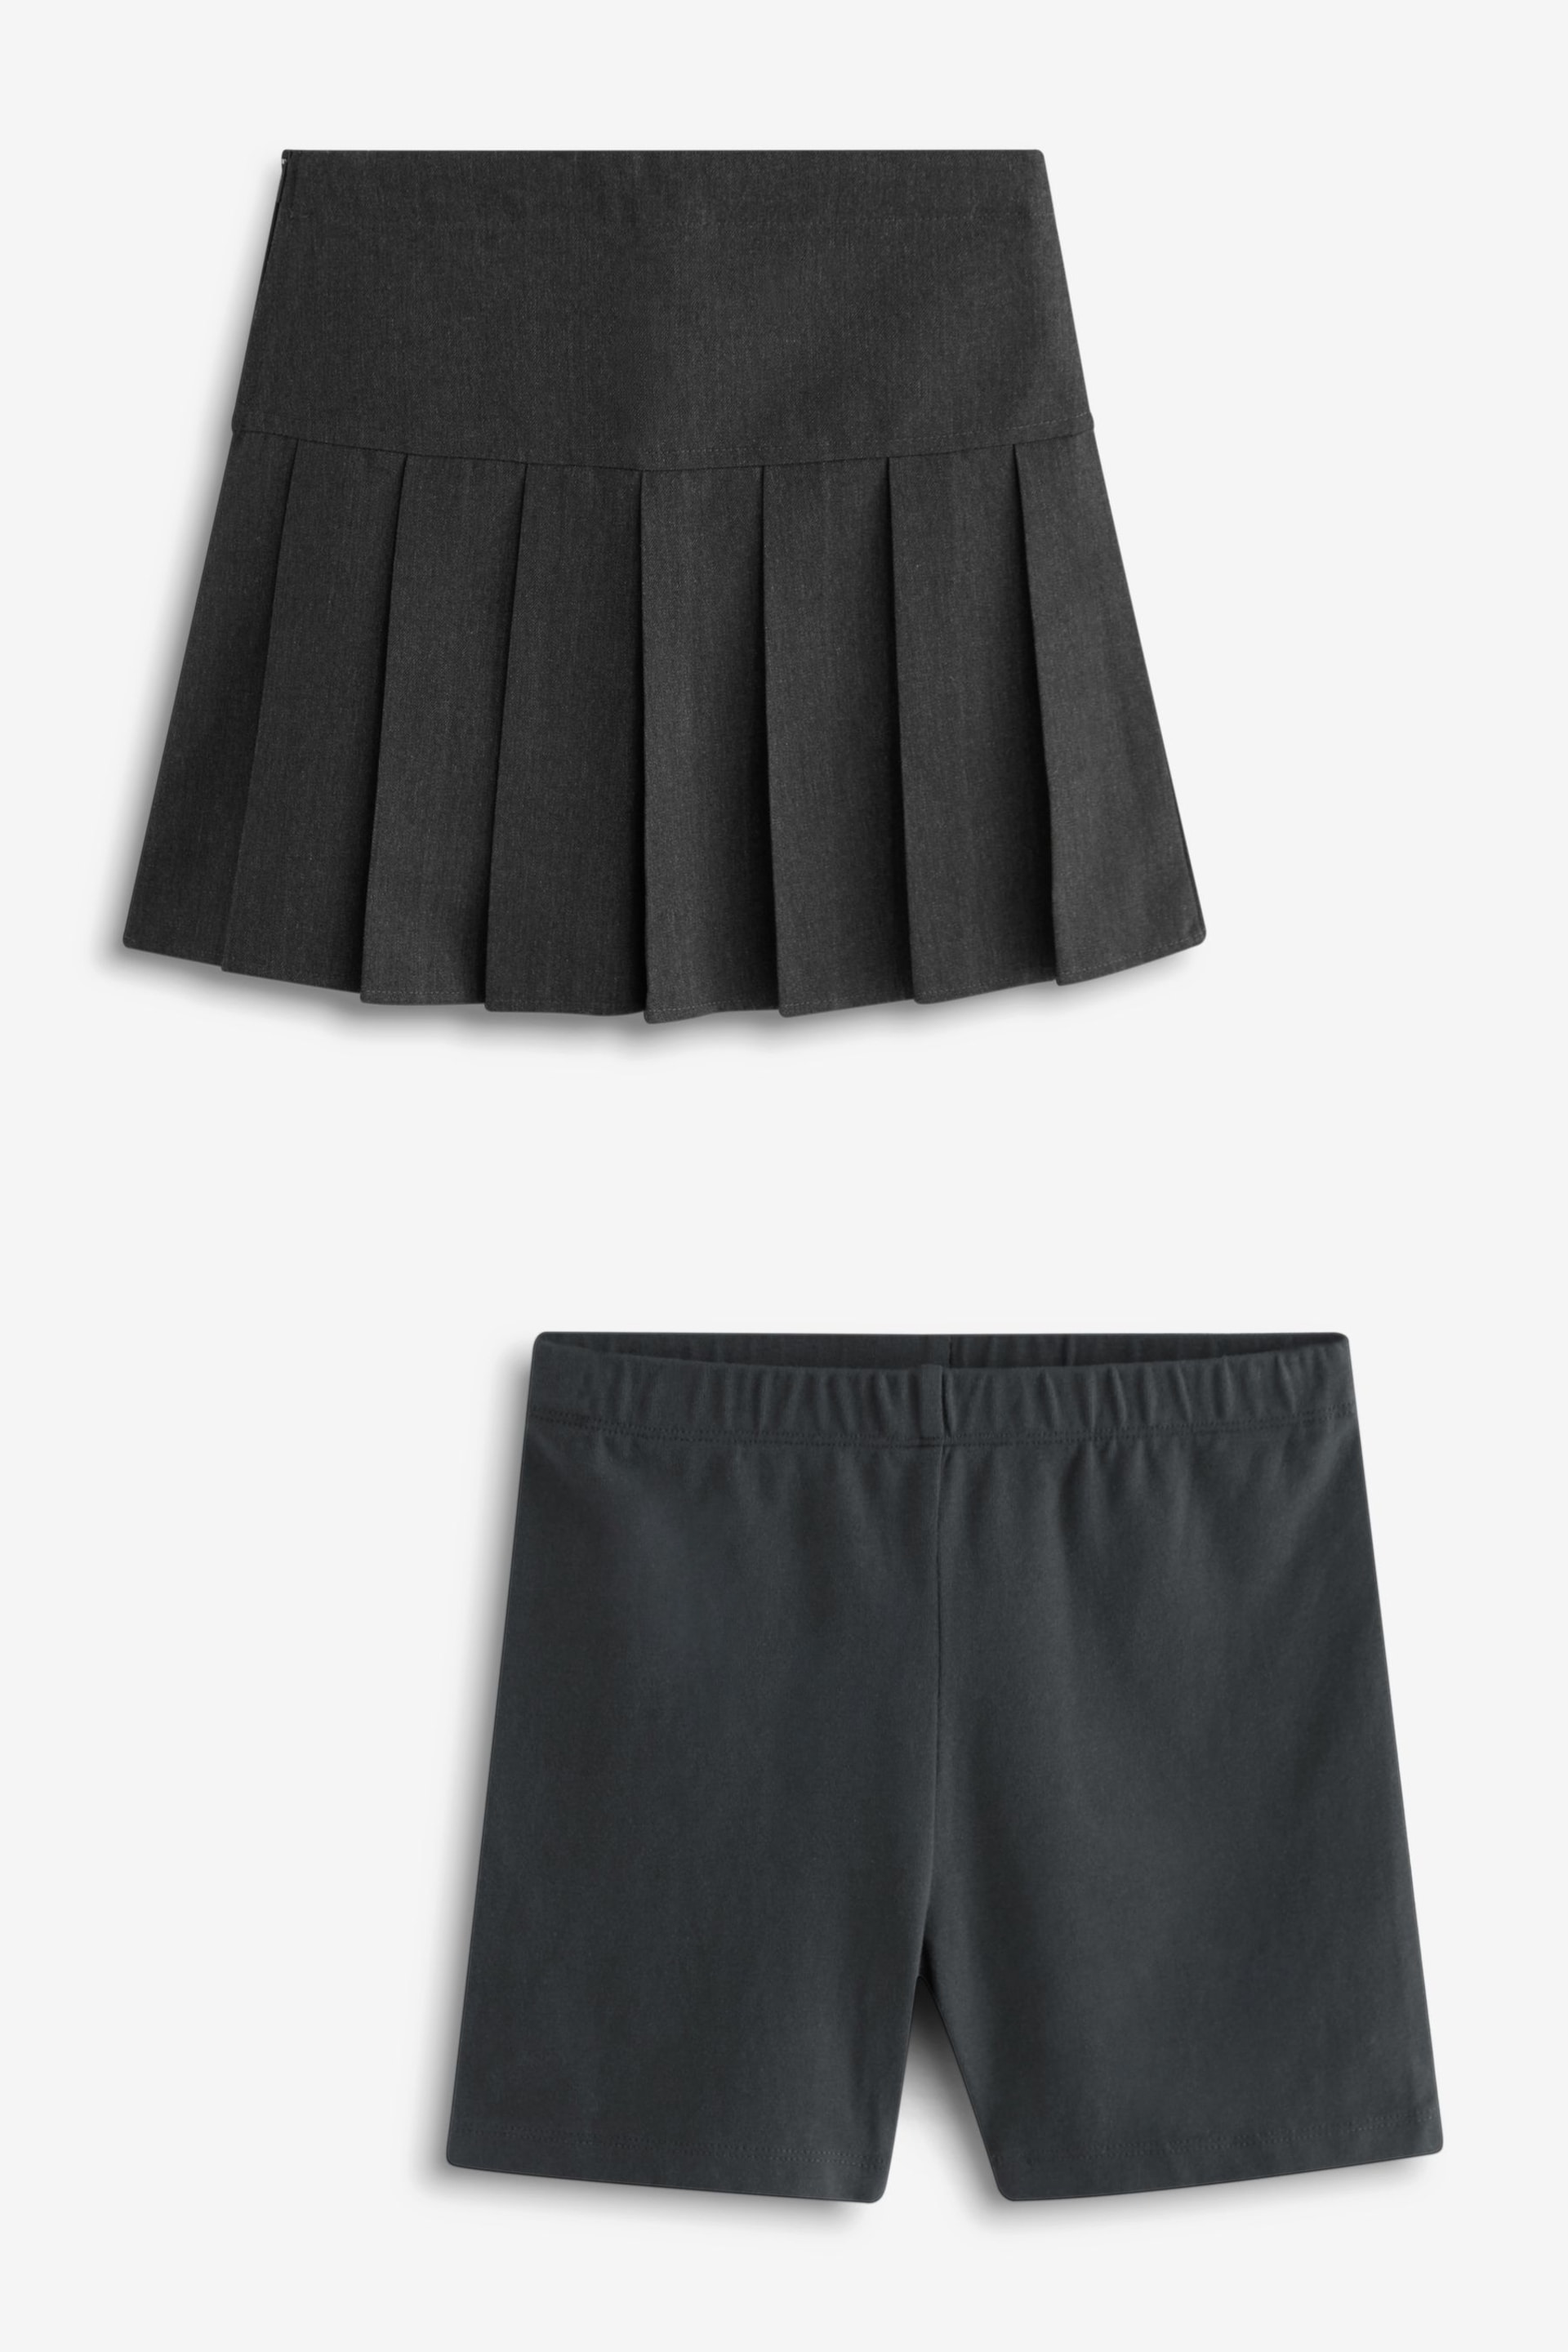 Grey Pleat Skirt And Cycle Shorts Set (3-17yrs) - Image 3 of 7